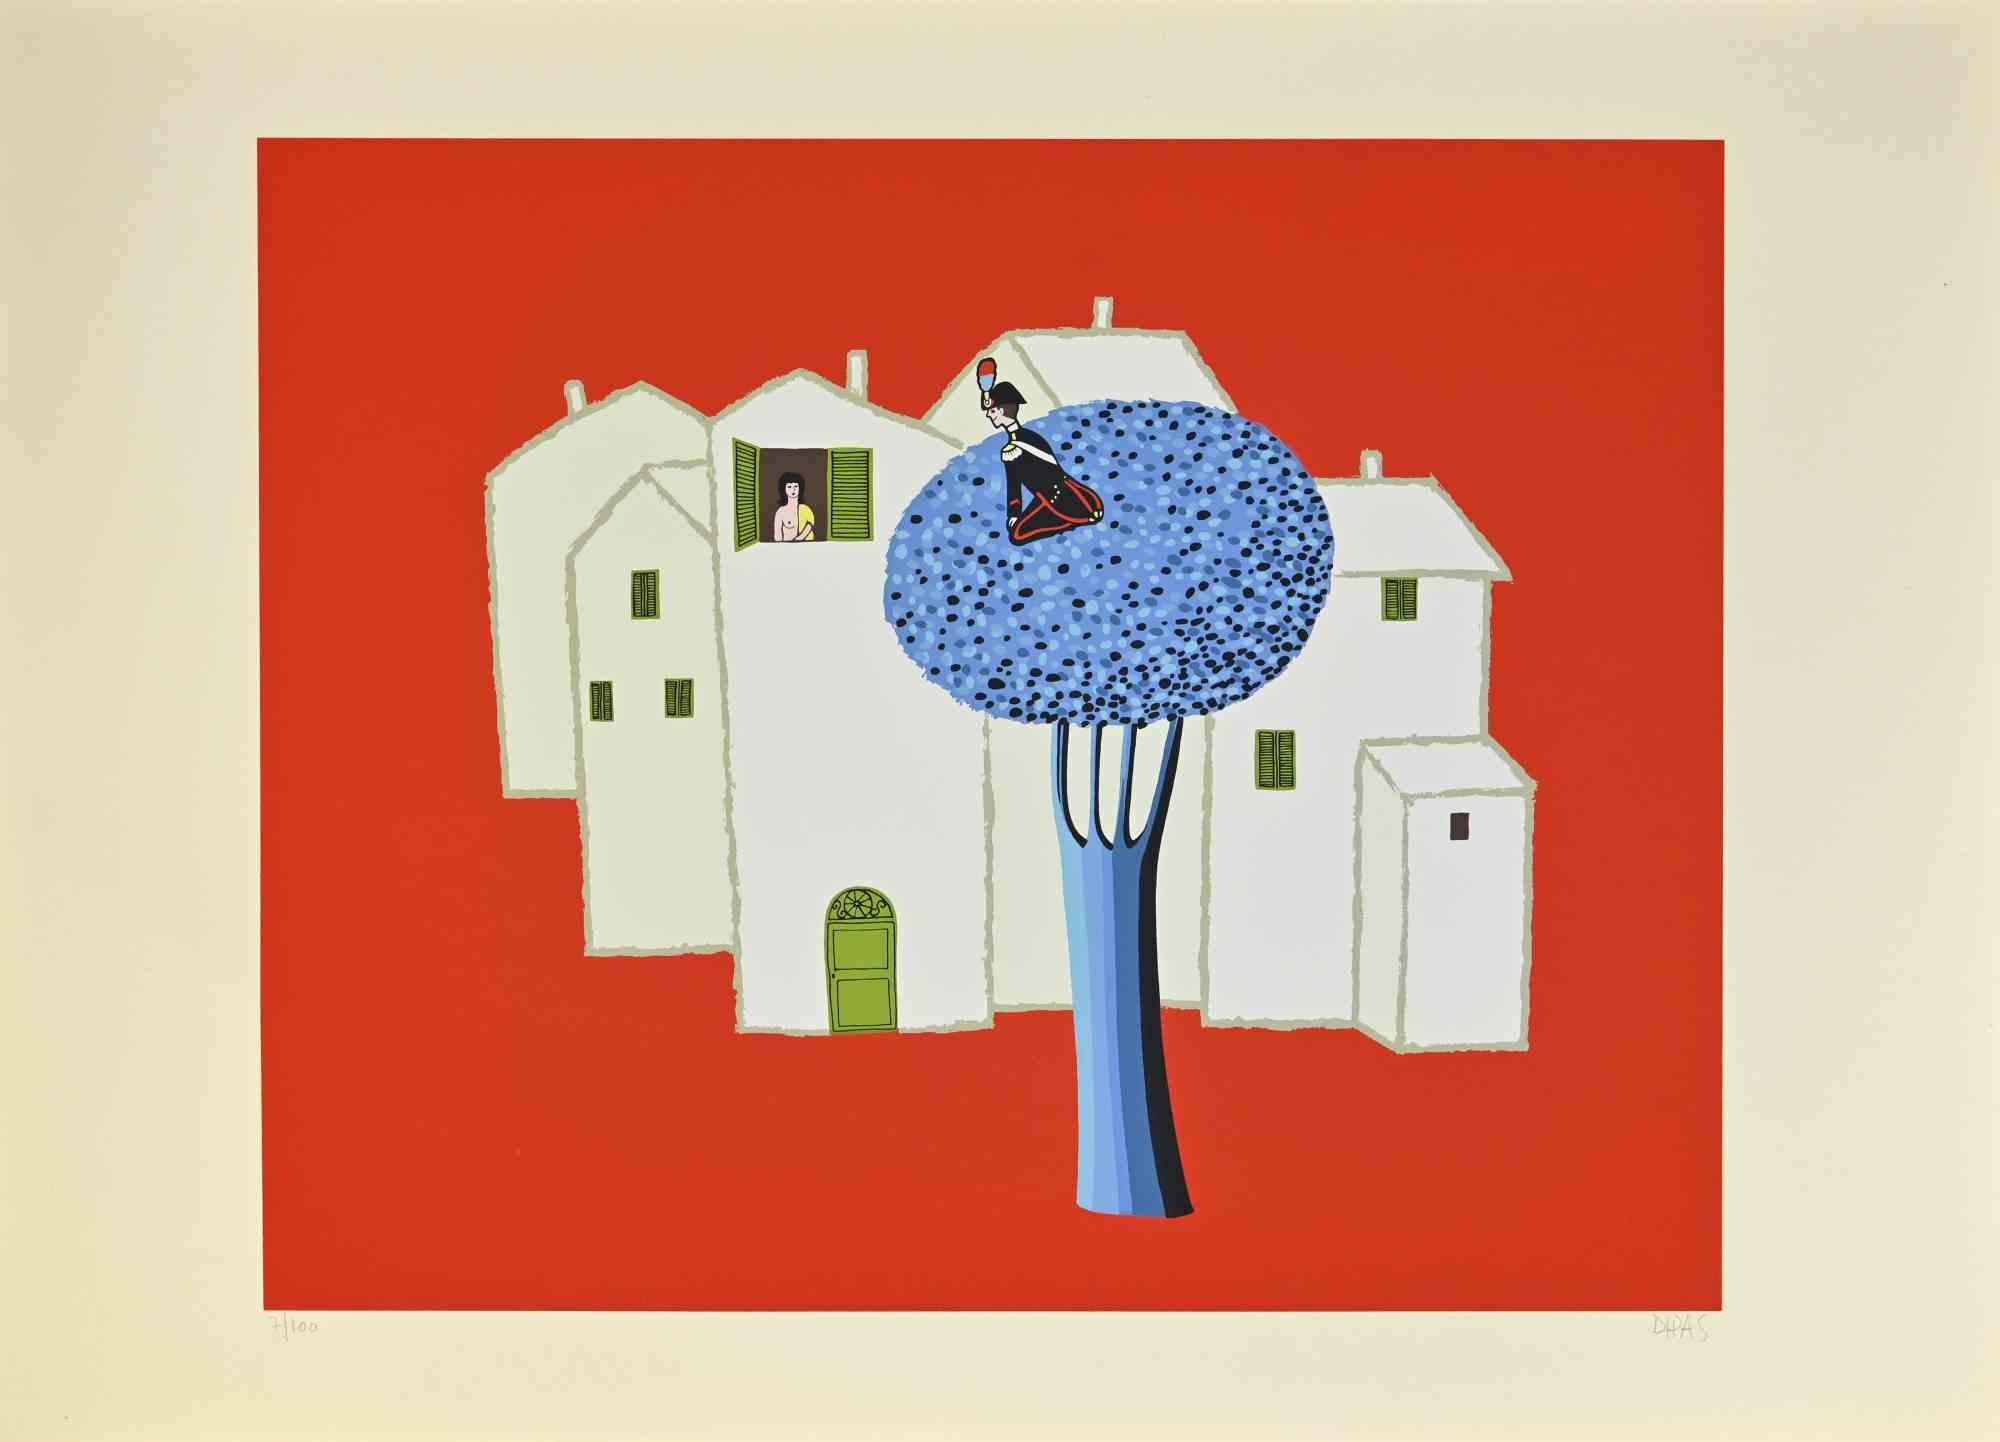 On the blue tree is a contemporary artwork realized by the artist Dipas in the 1970s.

Mixed colored screen print.

Hand signed on the lower right margin.

Numbered on the lower left margin.

Edition of 7/100.